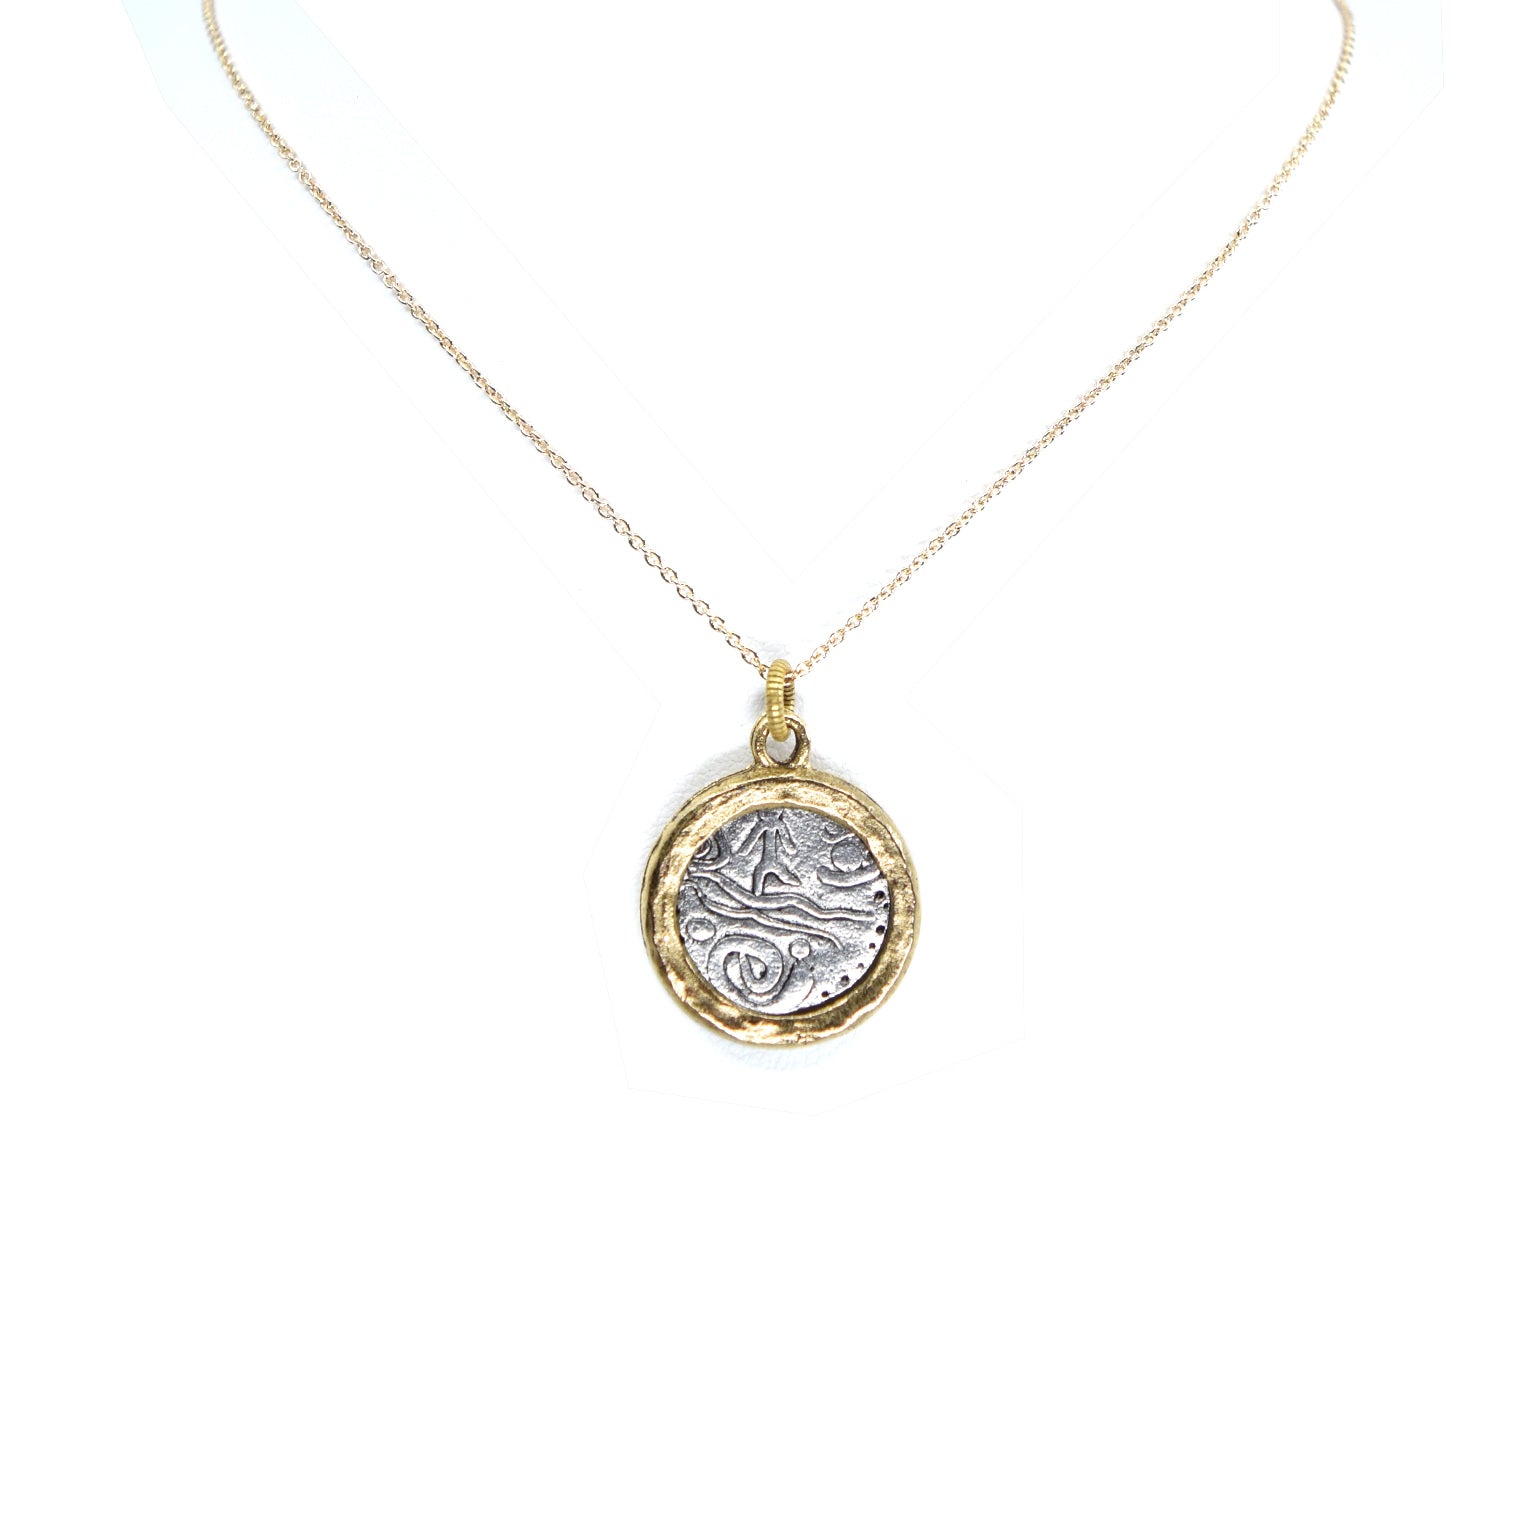 Neptune Coin Necklace